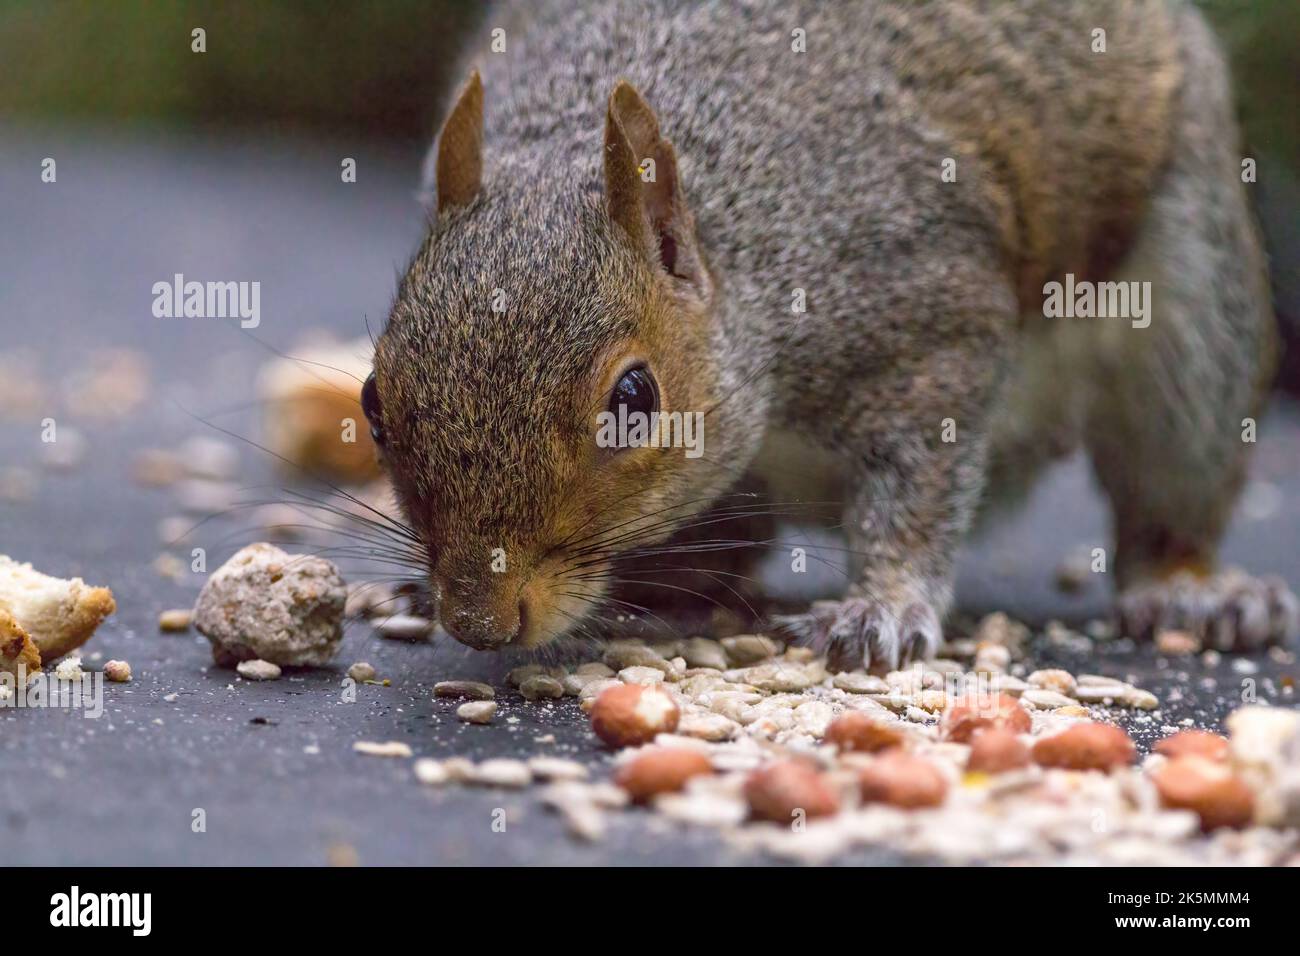 Squirrel grey (sciurus carolinesis) feeding at a small hide on mixed seed nuts and bread put out for birds. Grey and reddish fur with large bushy tail Stock Photo